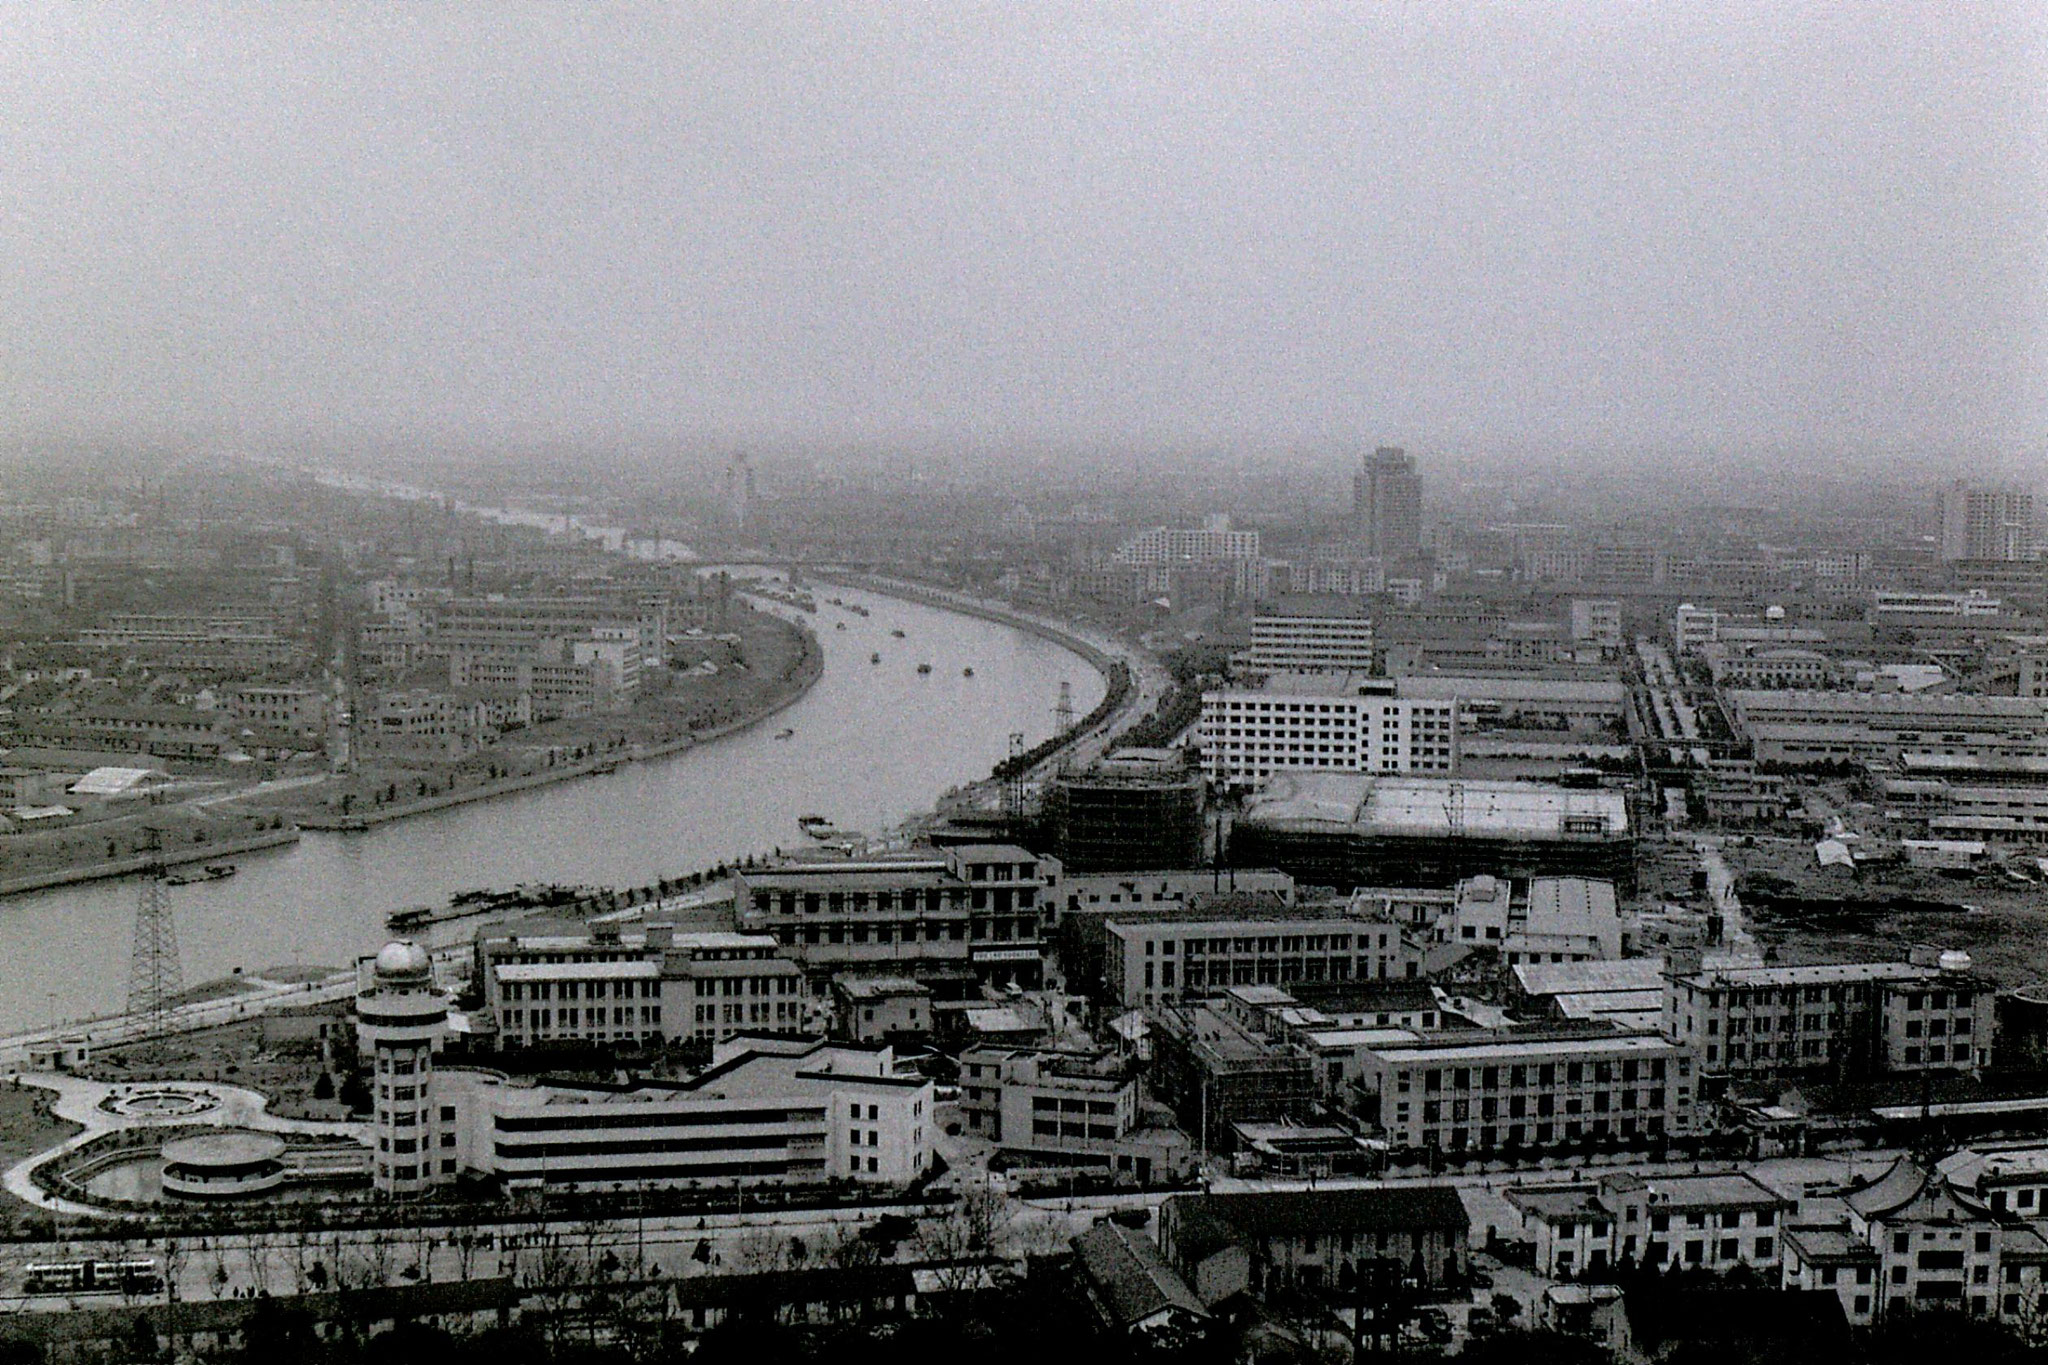 20/3/1989: 10: Wuxi Grand Canal from pagoda